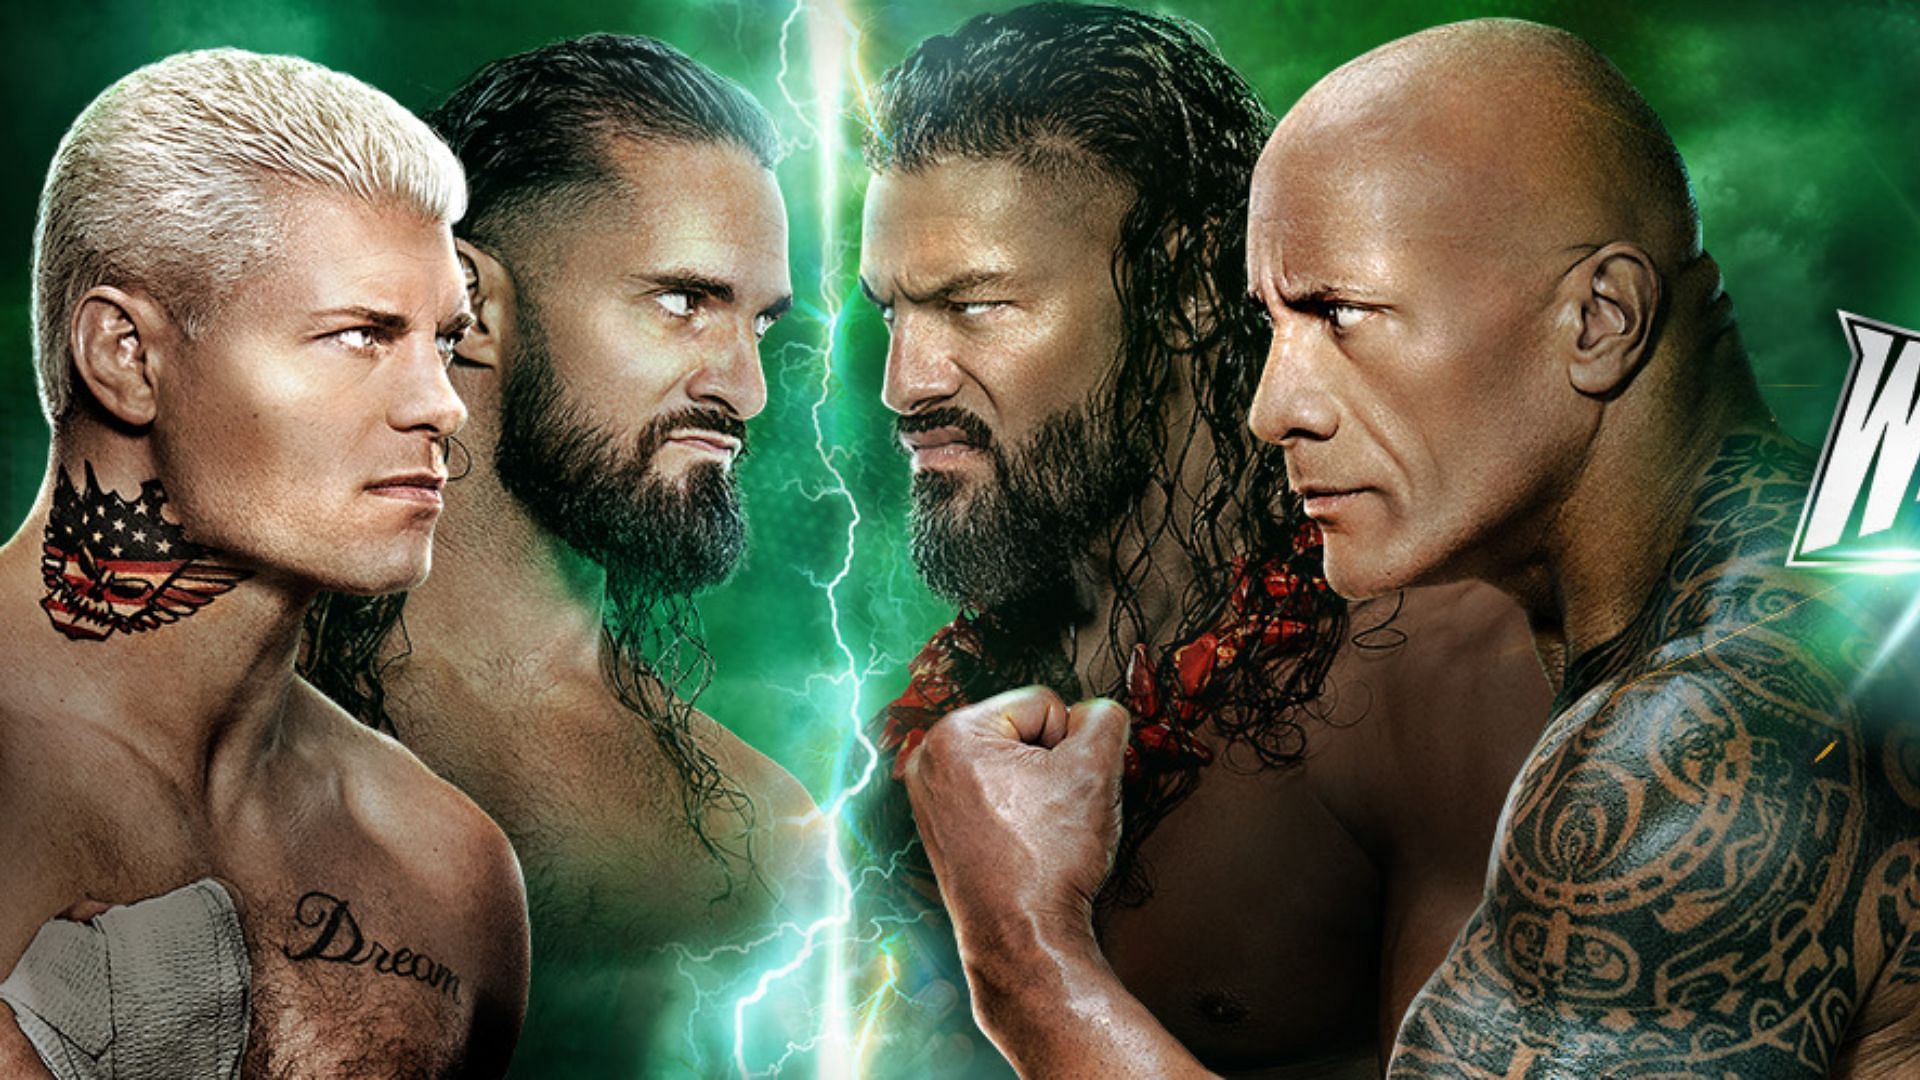 The Rock and Roman Reigns will headline Night 1 of WrestleMania XL against Seth Rollins and Cody Rhodes